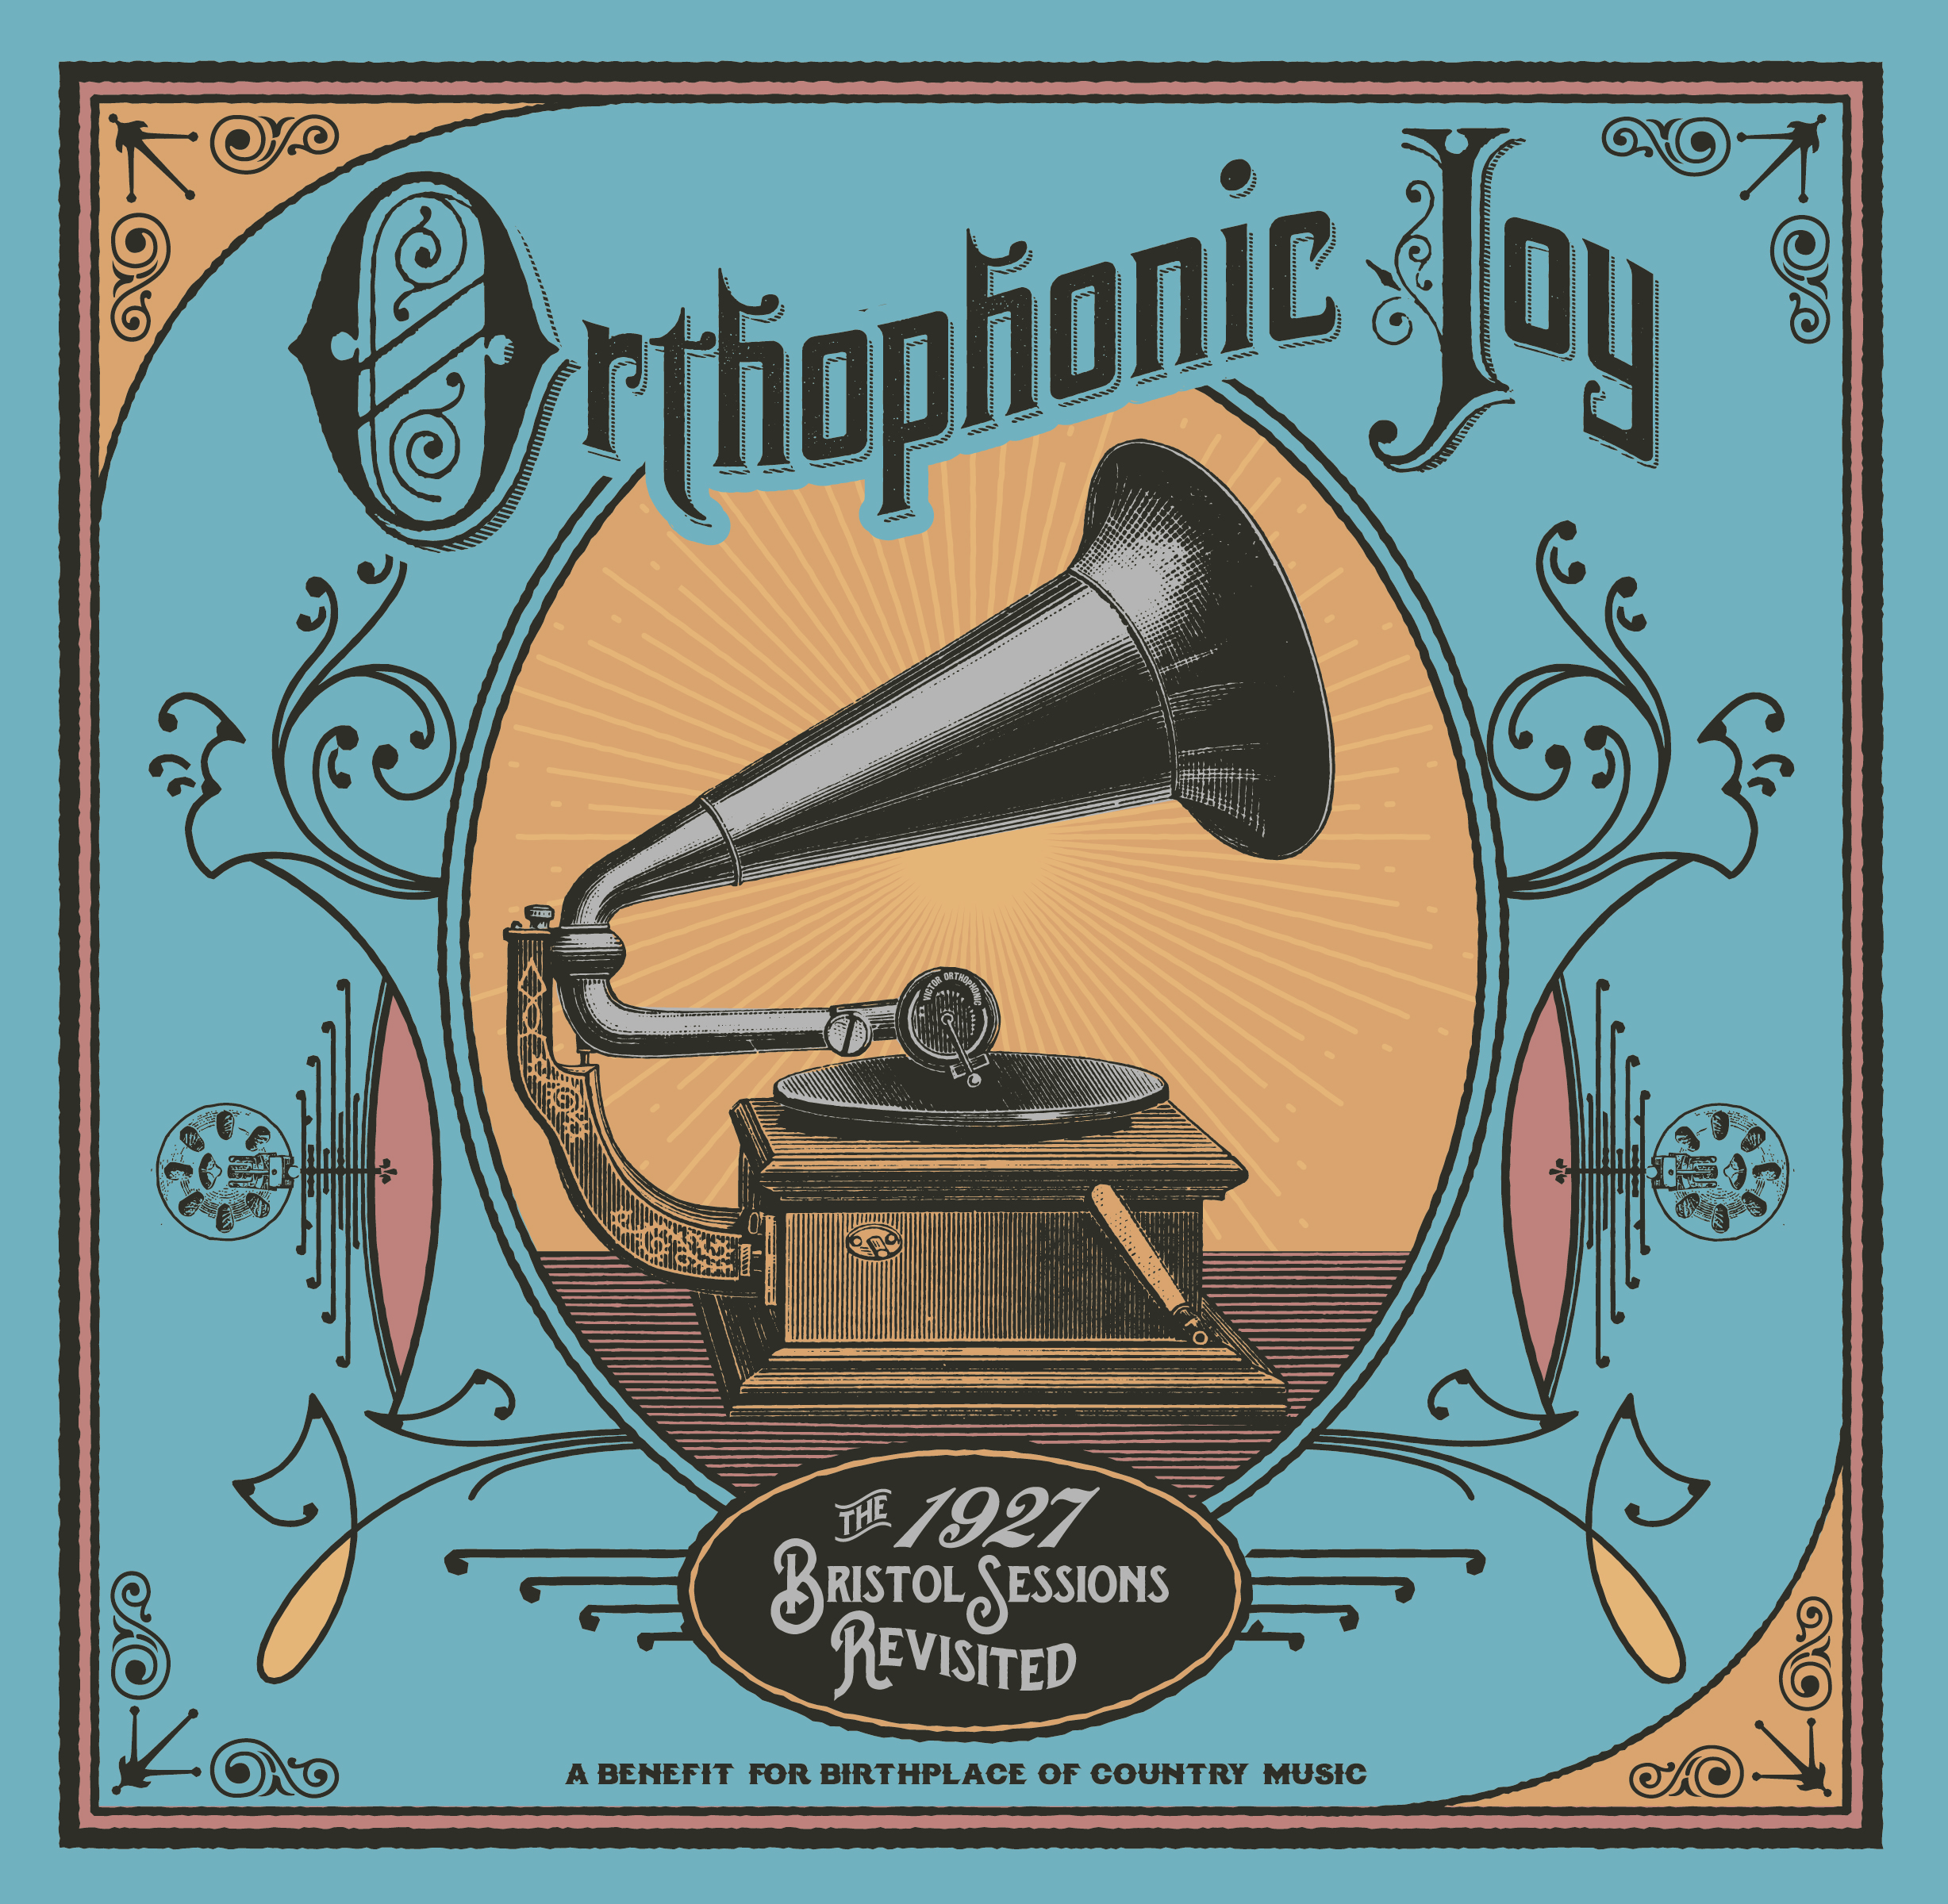 Dolly Parton, Vince Gill, Marty Stuart, and more, to appear on “Orthophonic Joy: The 1927 Bristol Sessions Revisited”